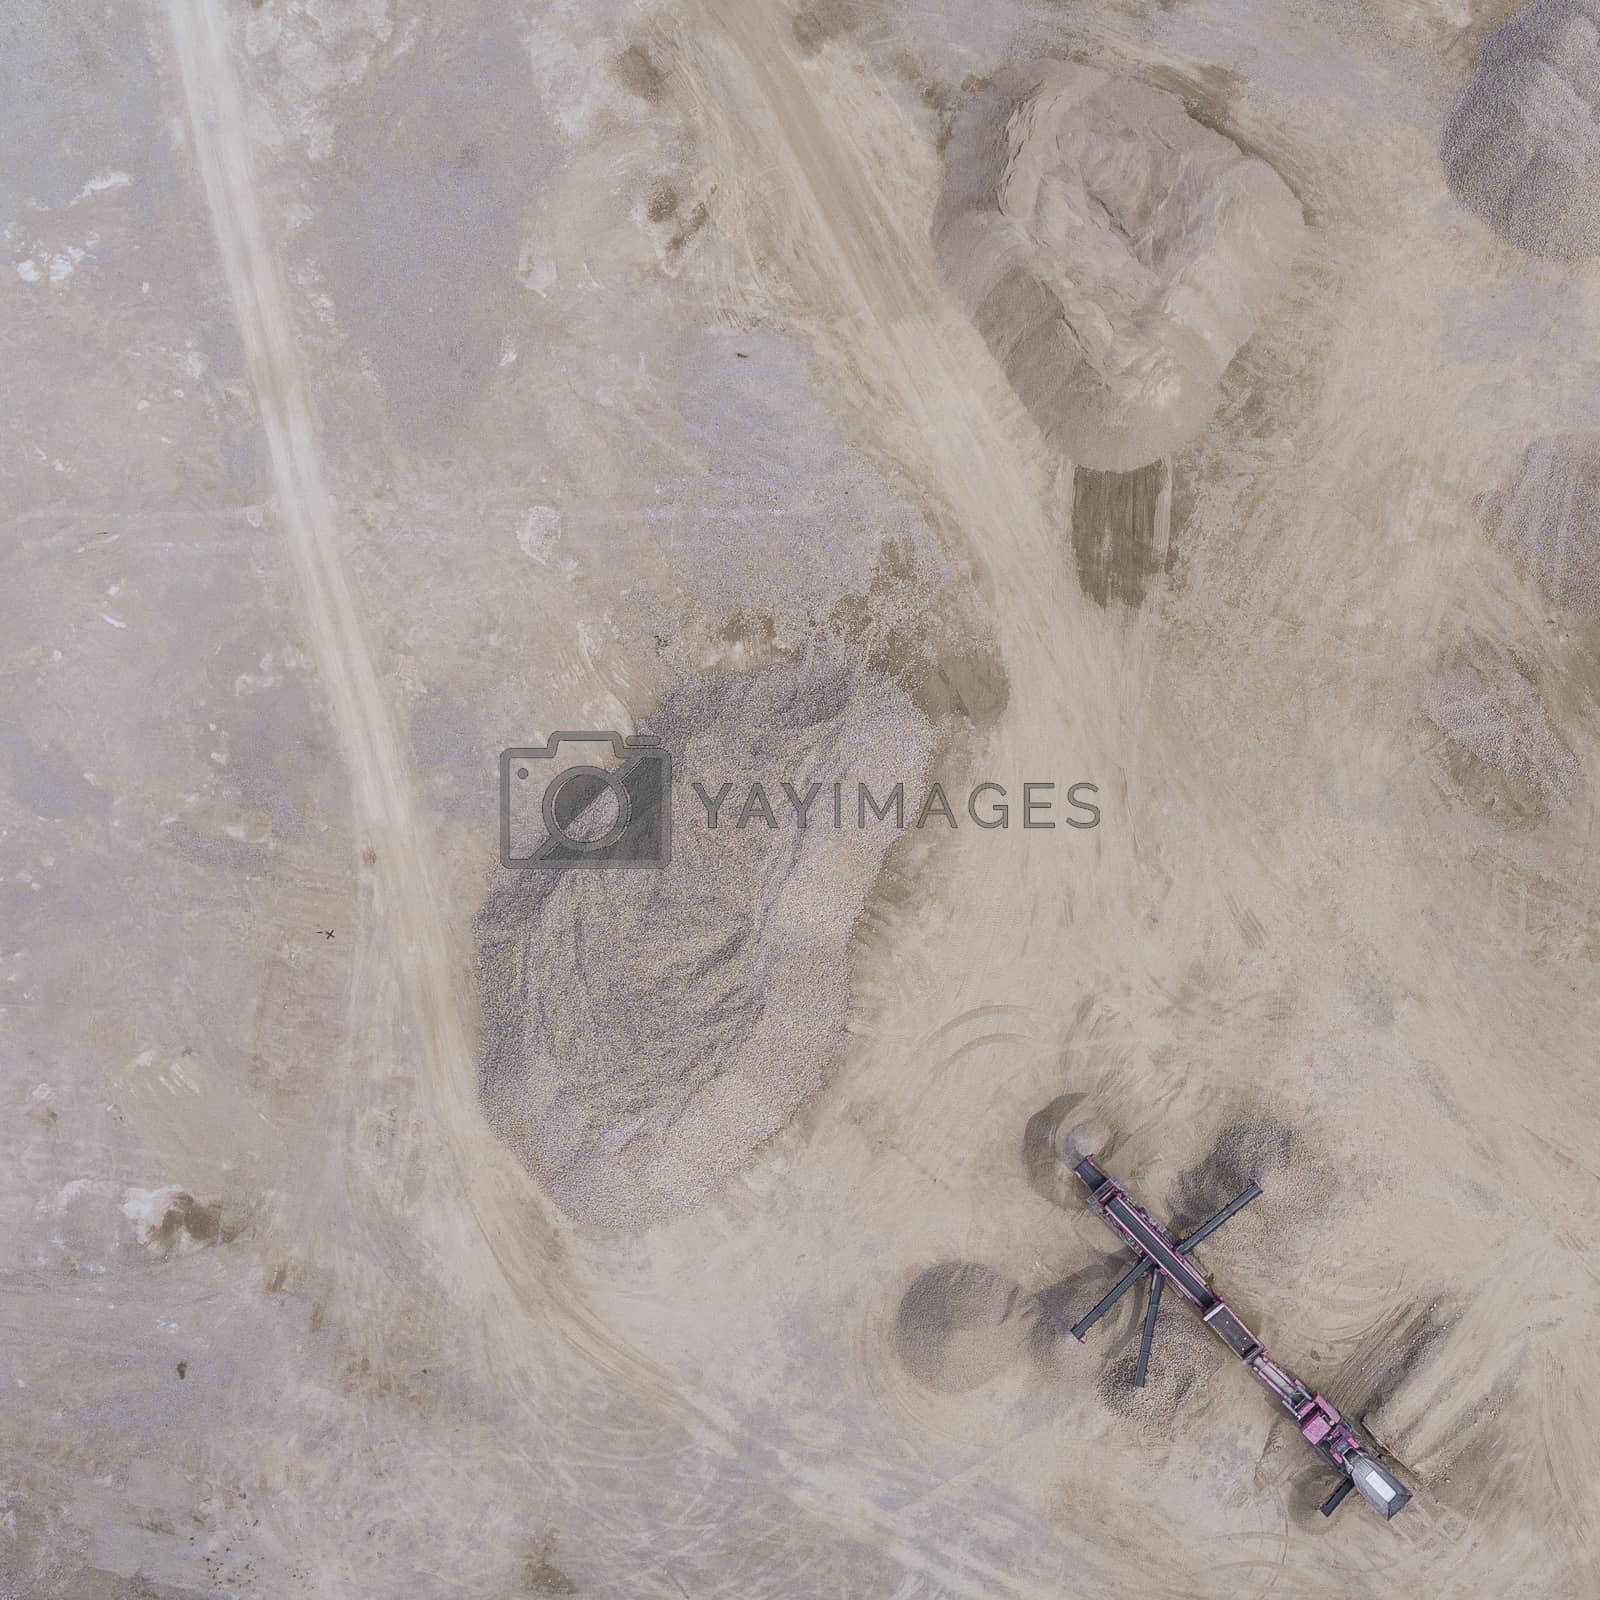 Royalty free image of Aerial view of excavator and truck working on the field of sand  by mariusz_prusaczyk